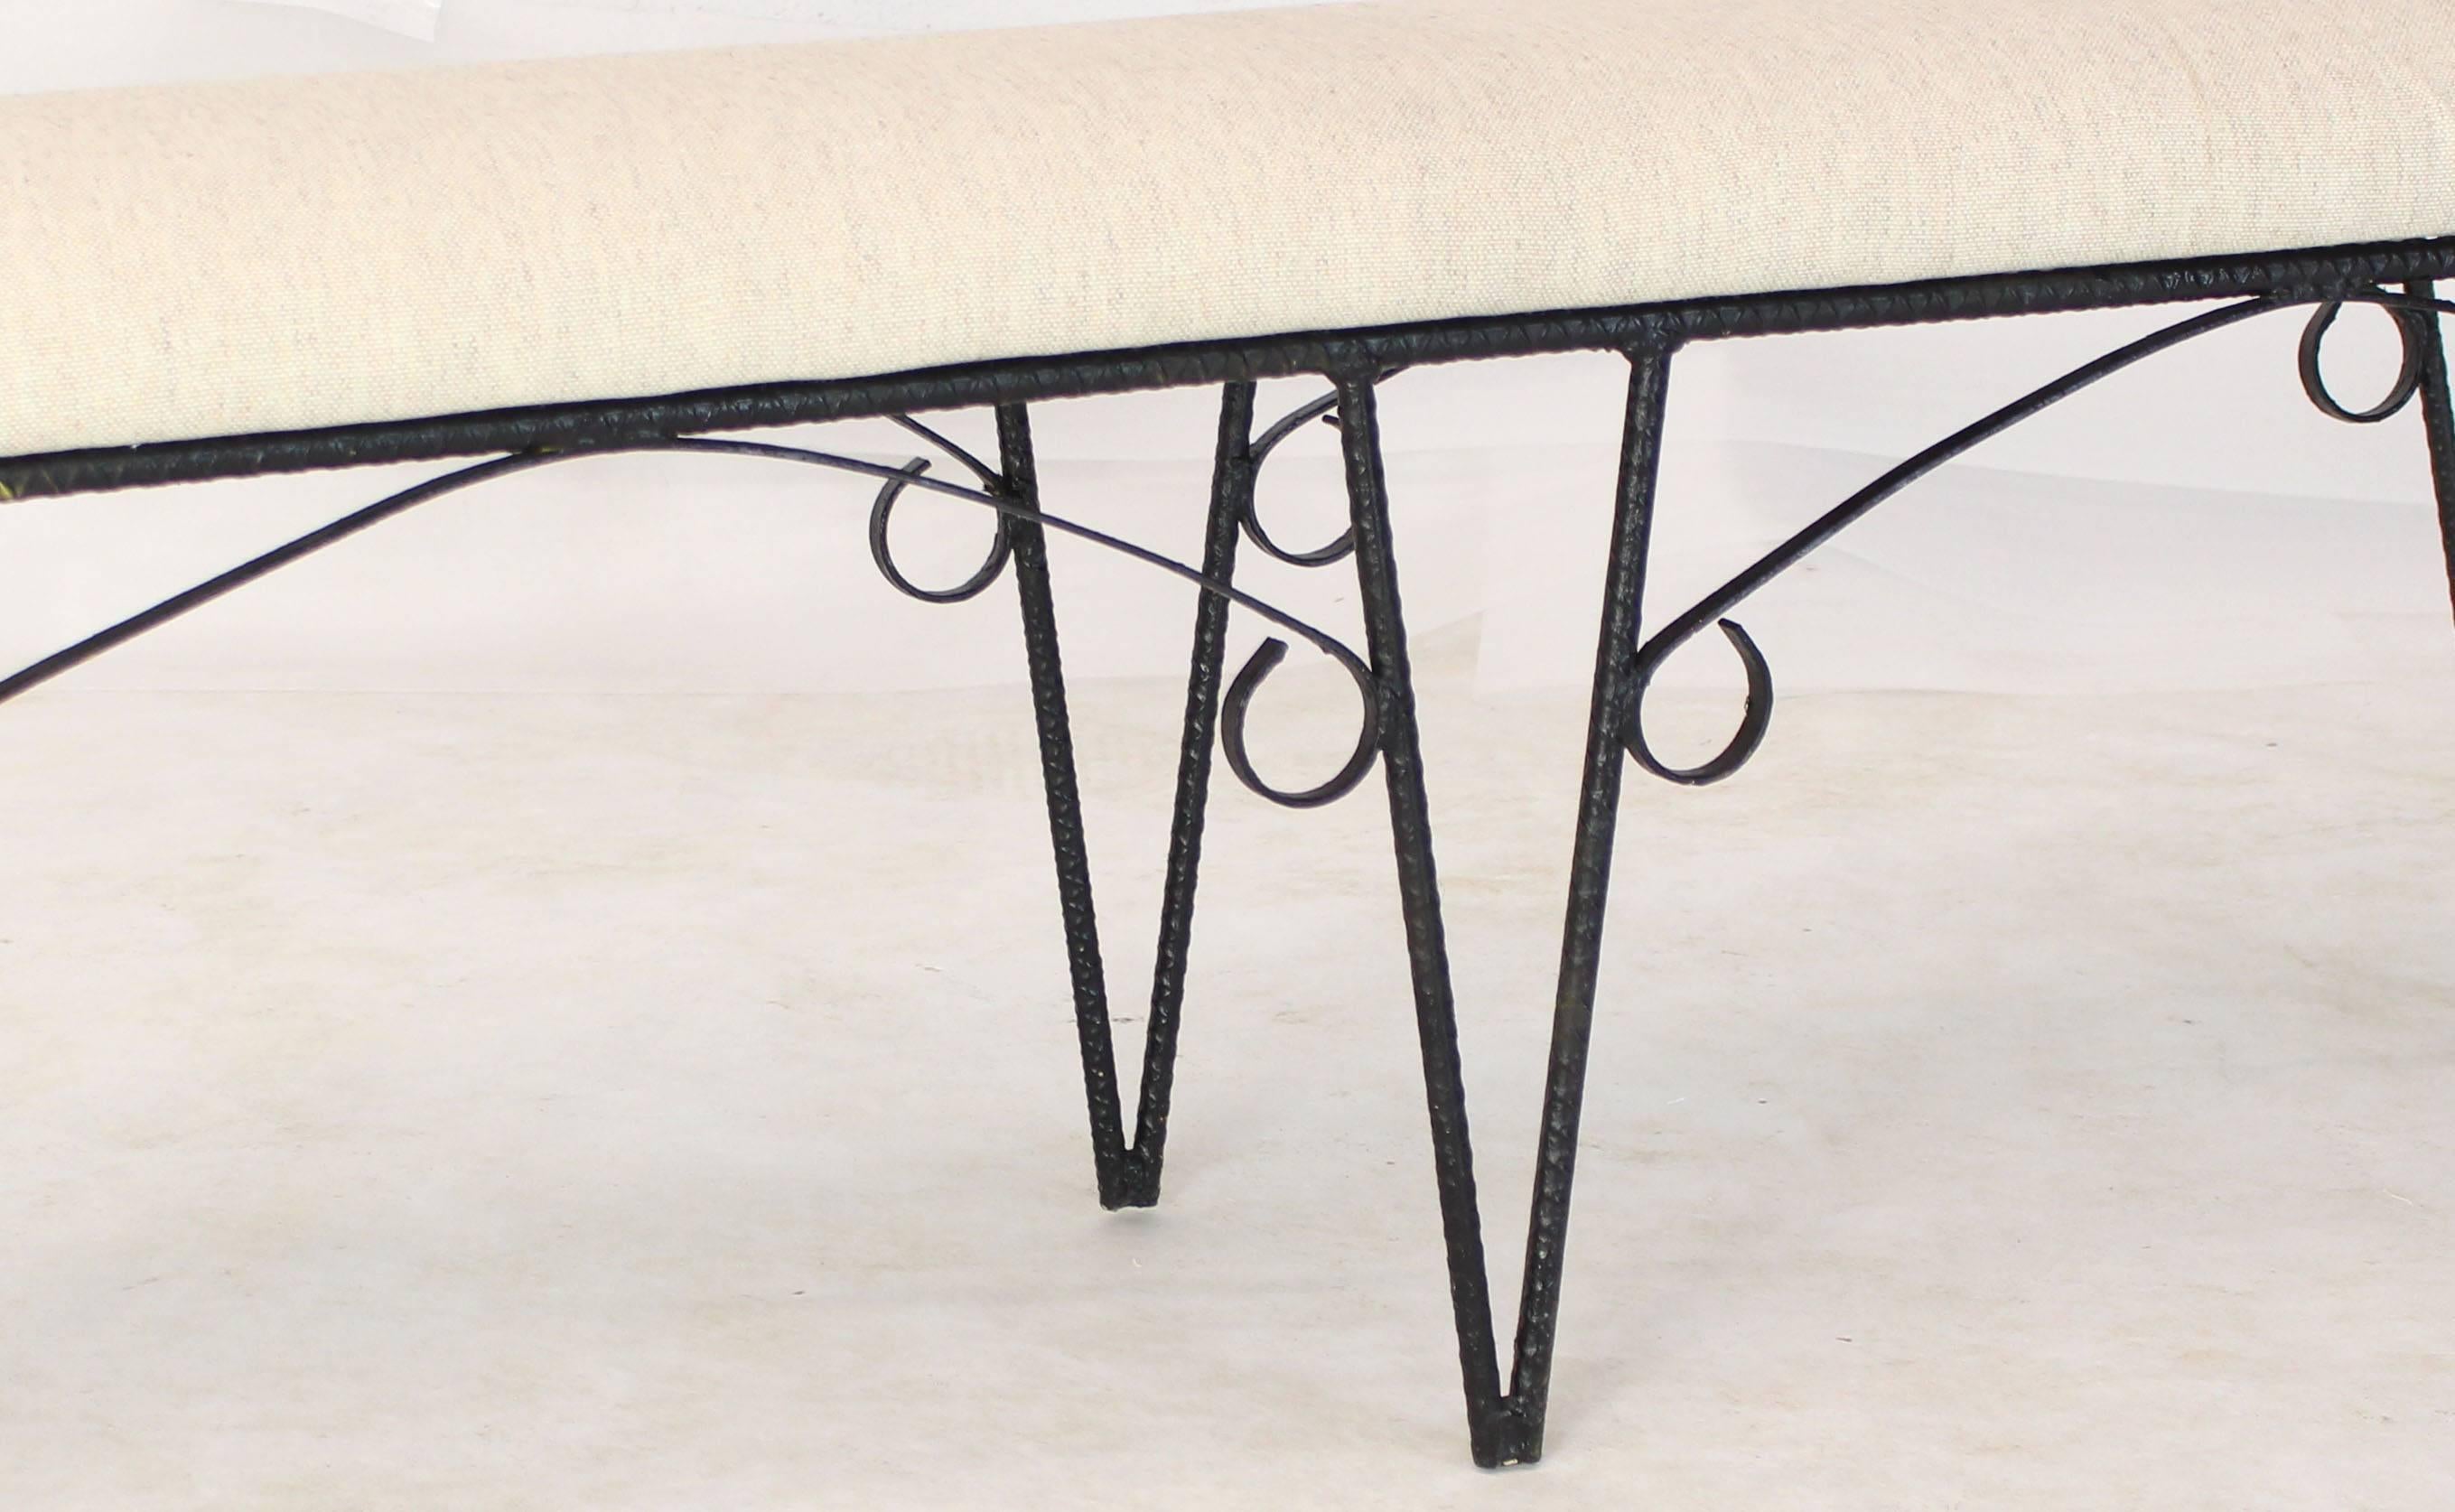 Decorative welded rebar with scrolls Mid-Century Modern bench from, circa 1970s, with new heavy solid linen upholstery.